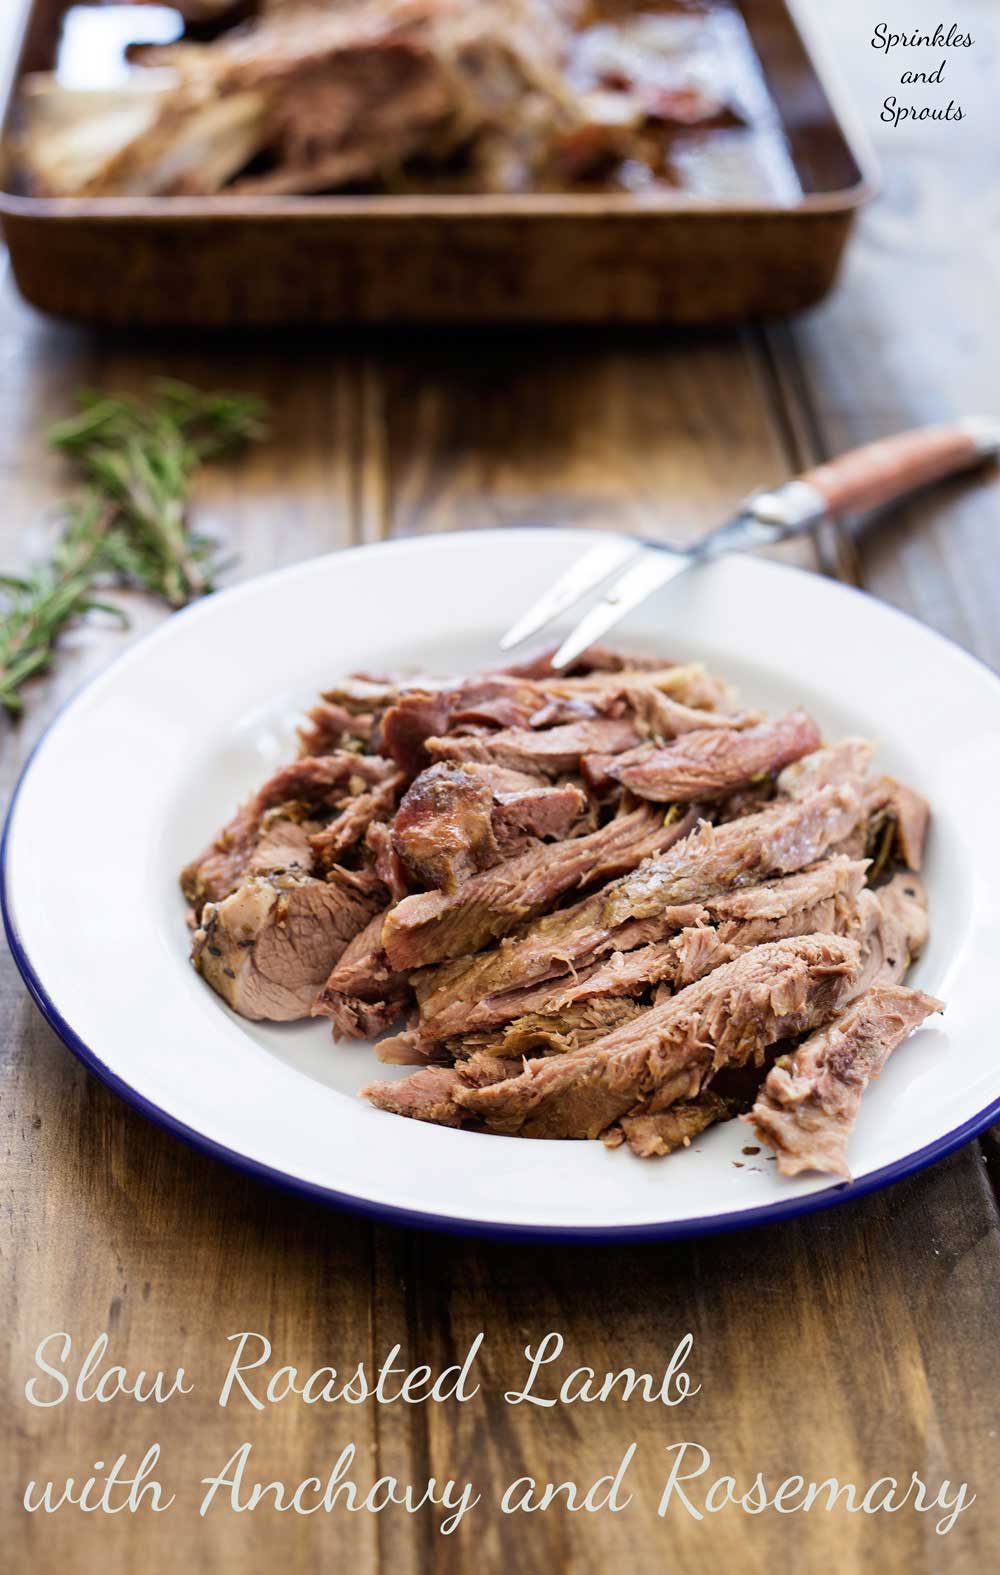 Slow Roasted Lamb with Anchovy and Rosemary. There is a touch of the Greek about this melt-in-the-mouth lamb dish. Succulent, juicy lamb with a rich flavour and a wonderful depth from the rosemary, anchovy and garlic. | Sprinkles and Sprouts